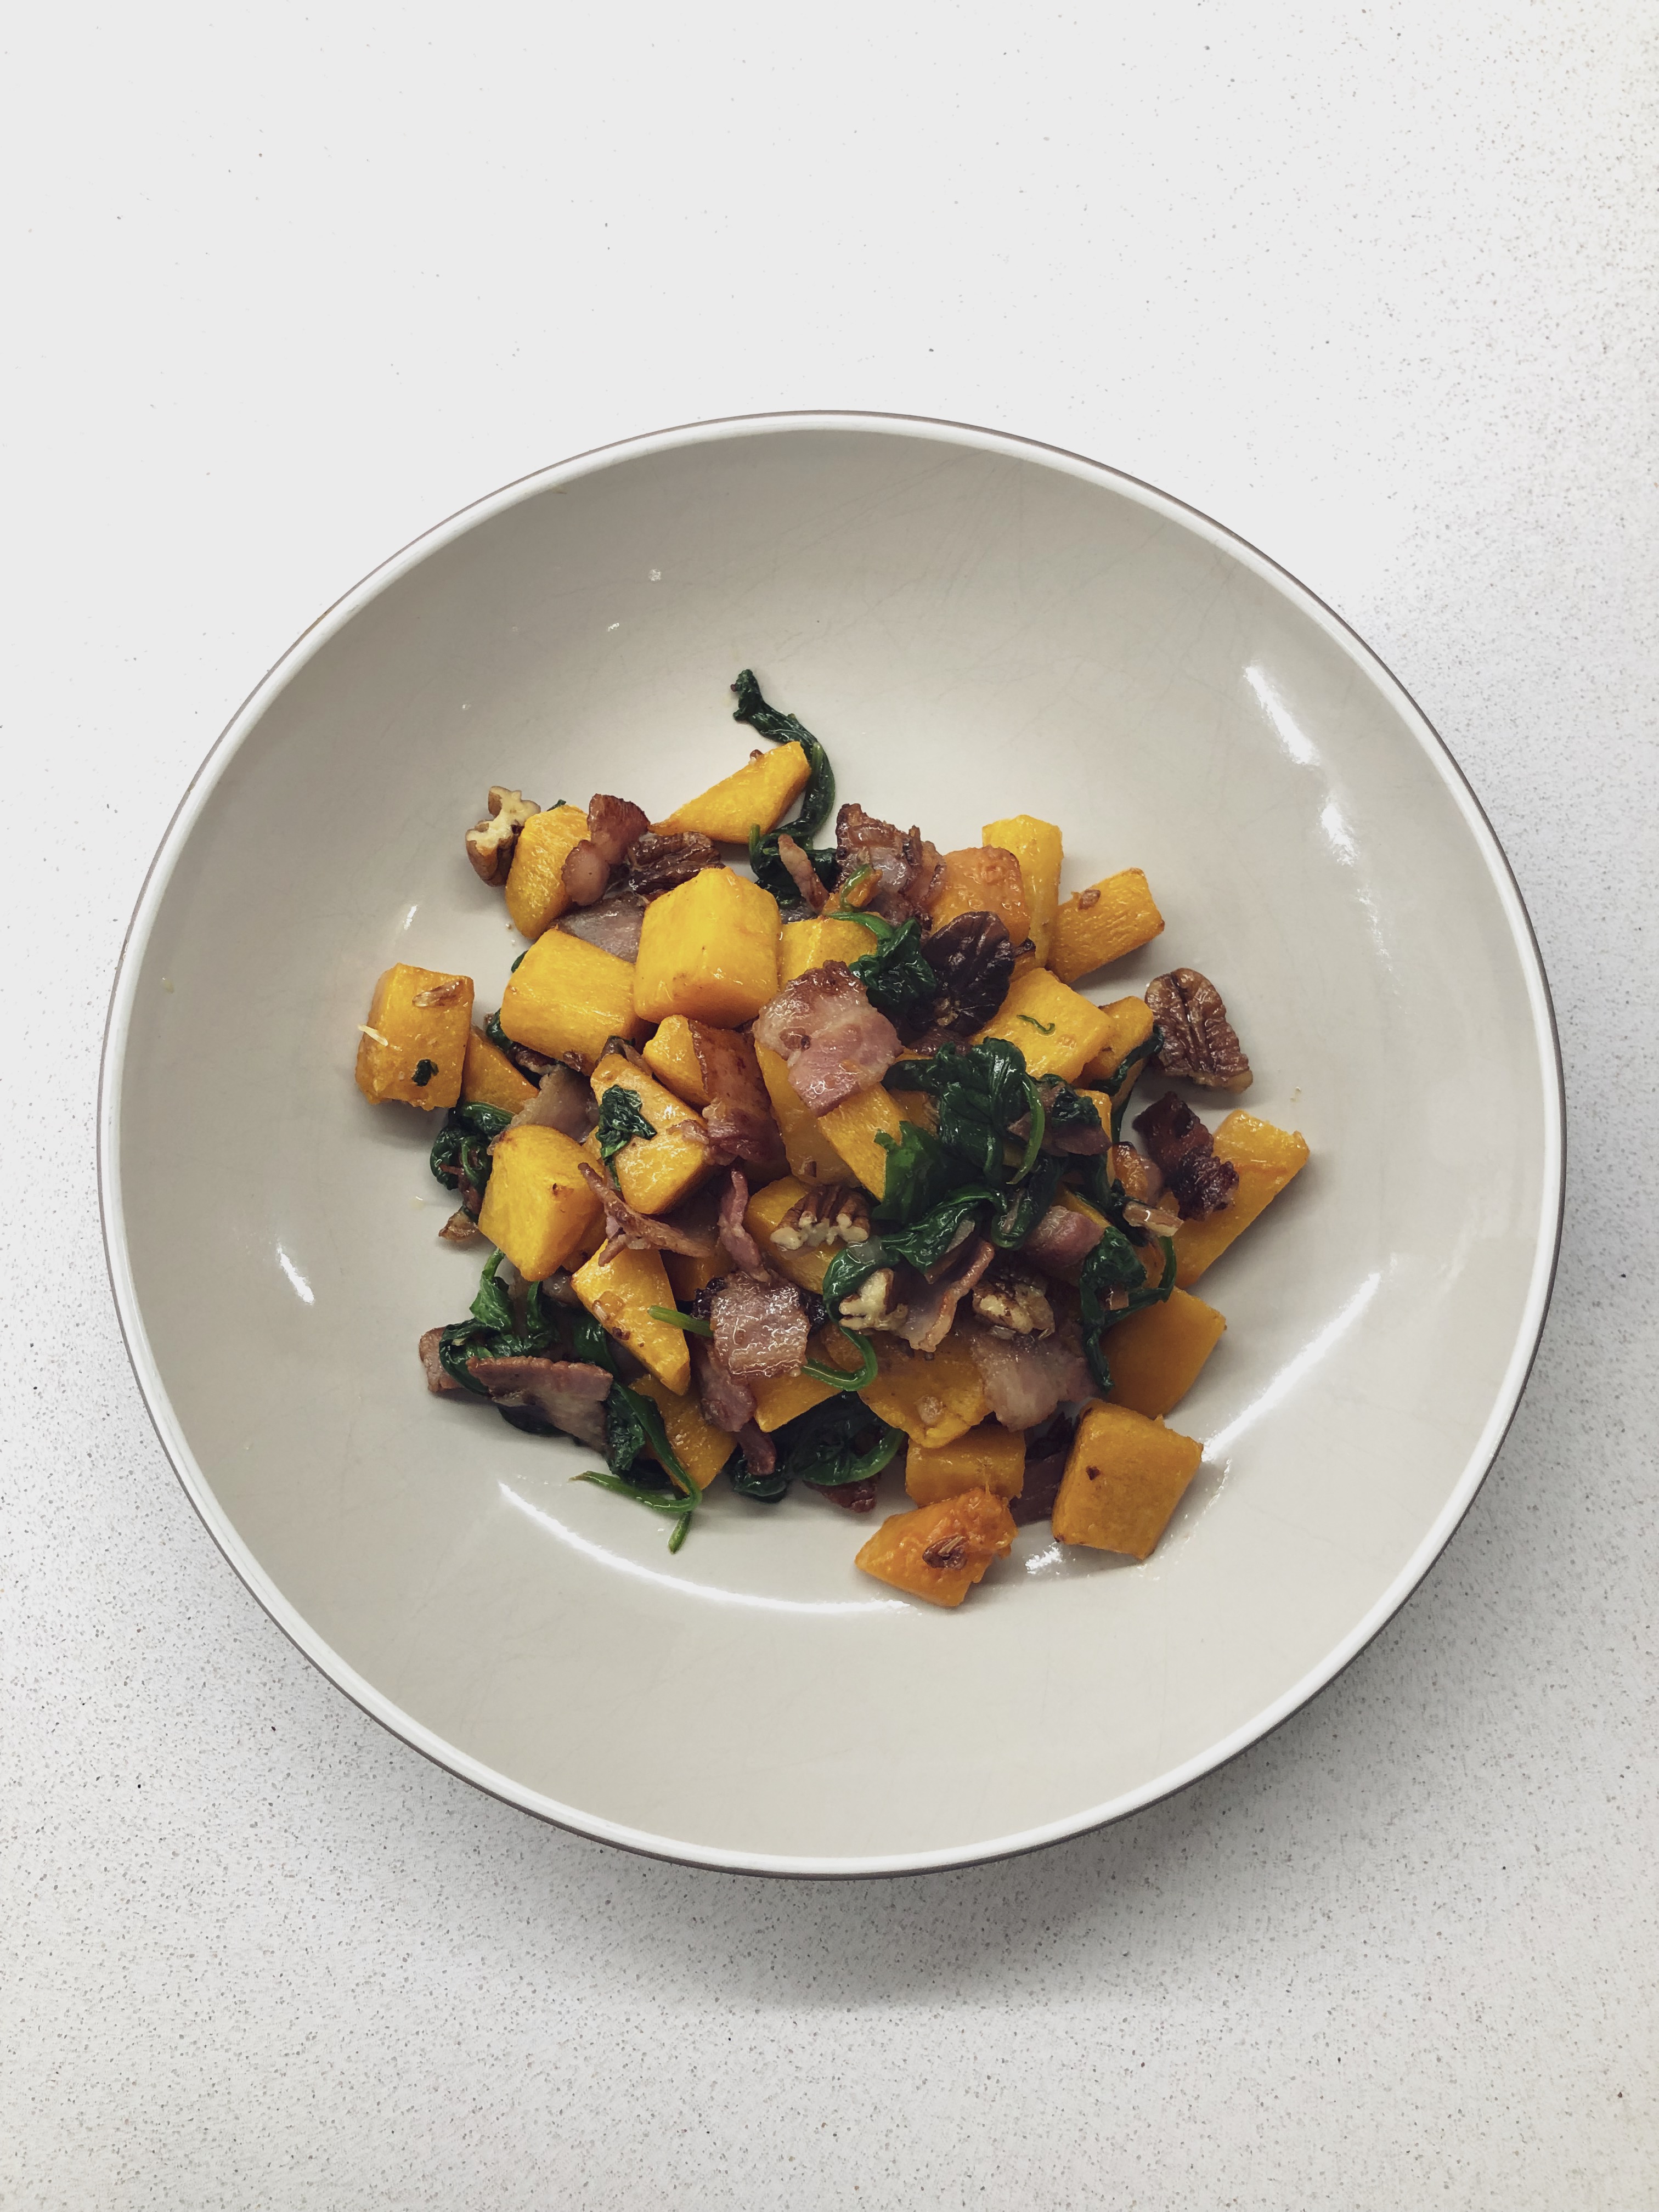 Butternut, bacon and pecan salad